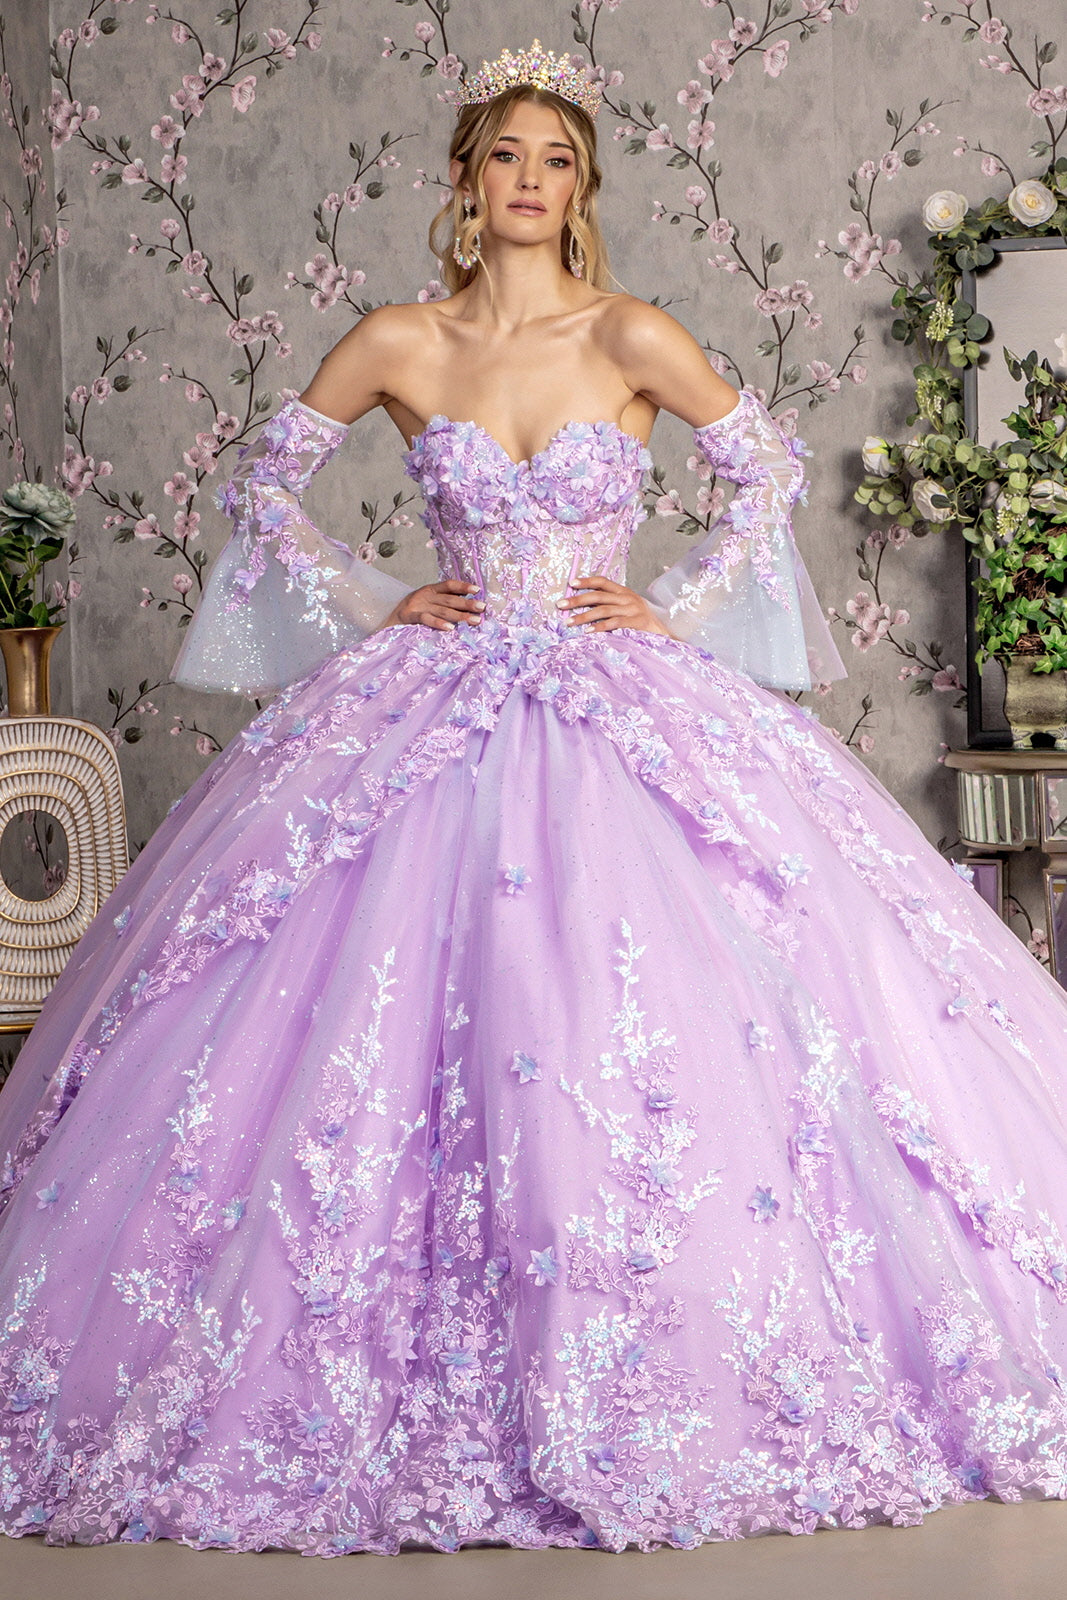 Woman in elaborate purple floral ball gown.